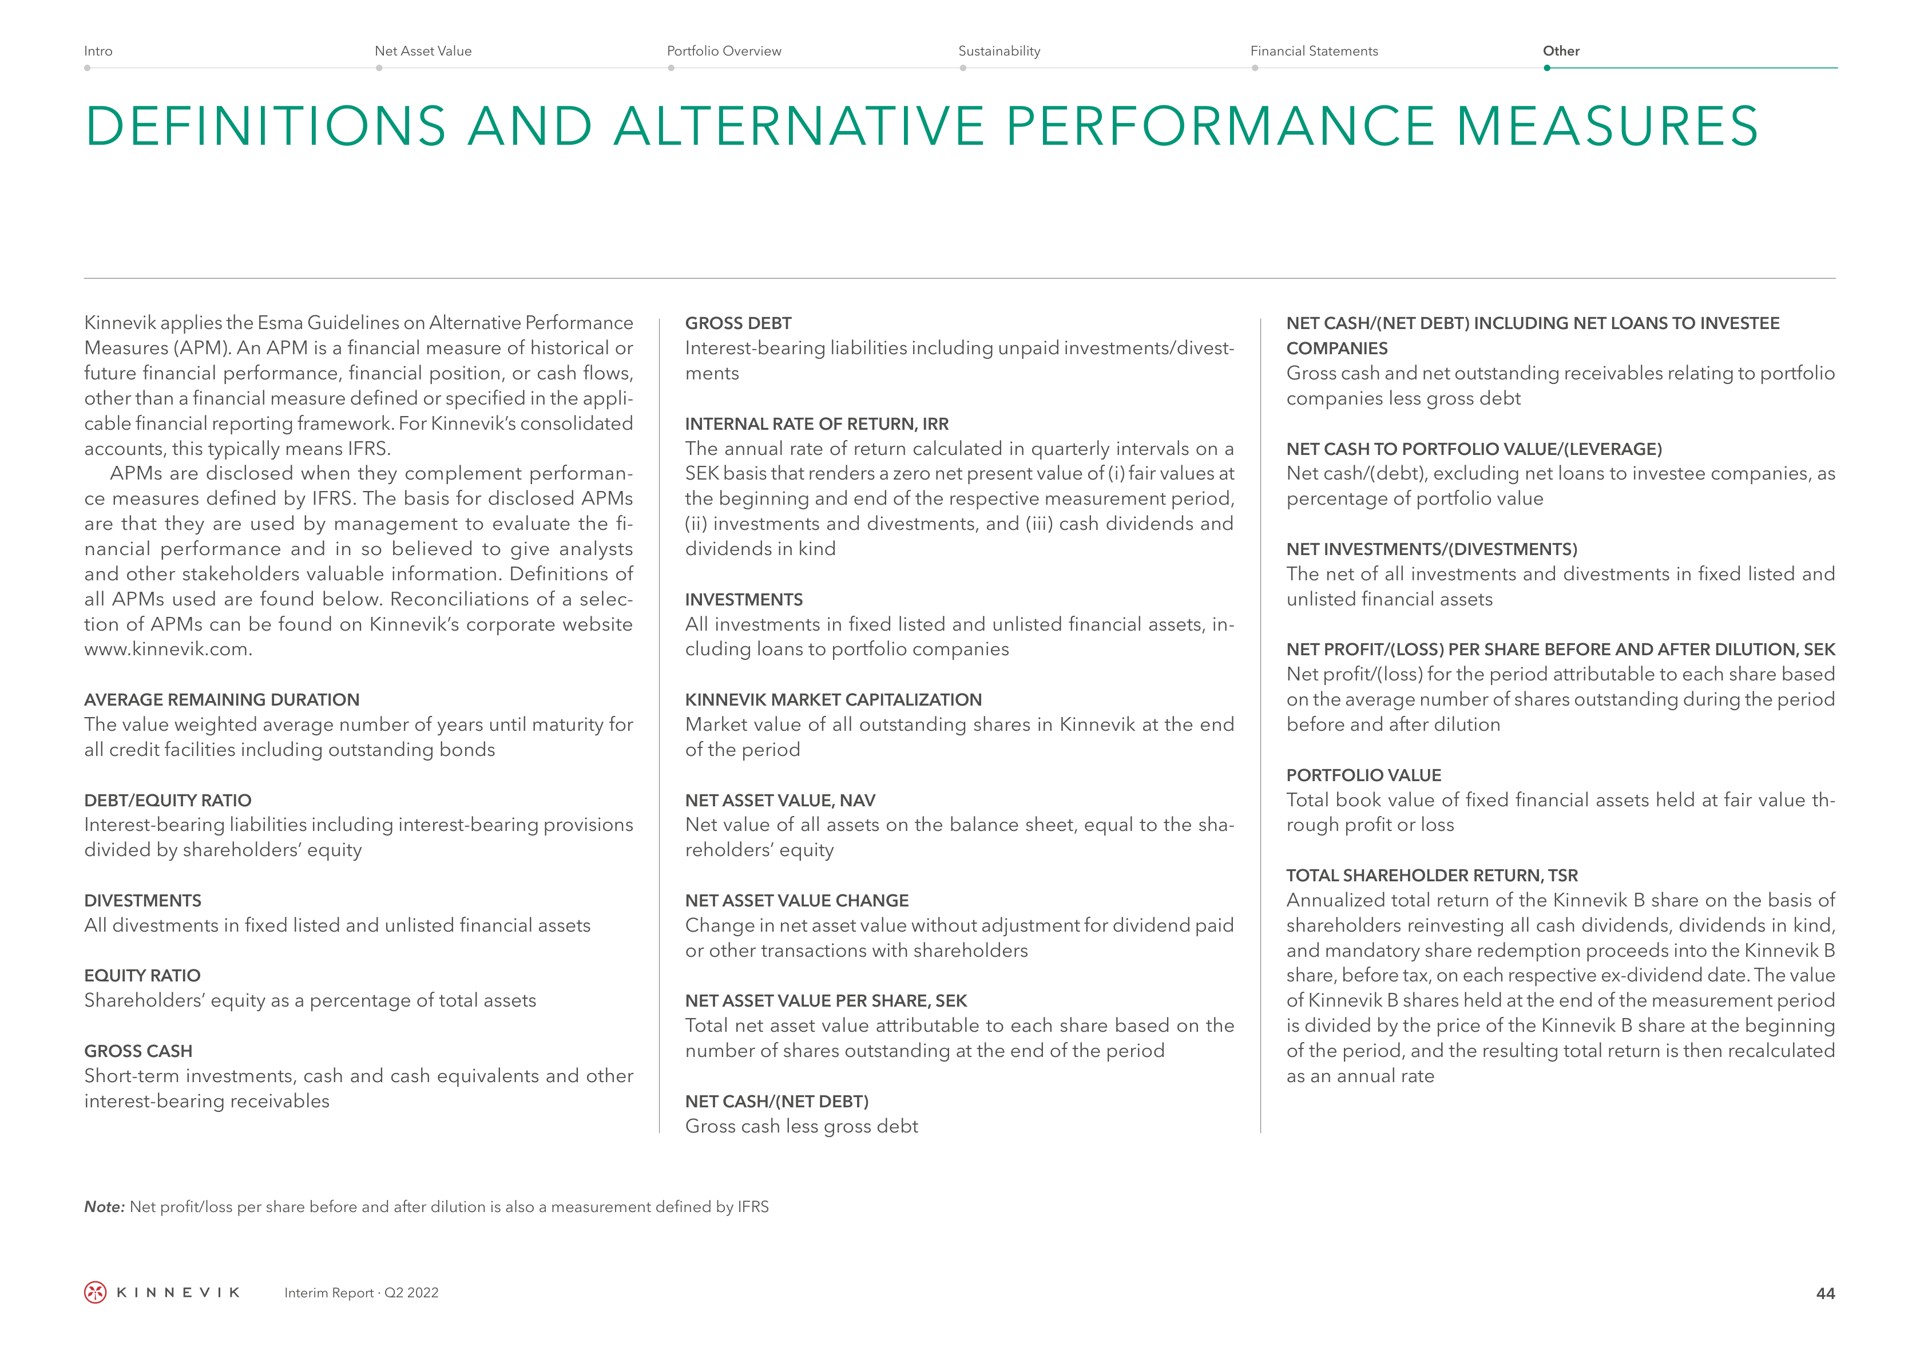 definitions and alternative performance measures applies the guidelines on alternative performance measures an is a financial measure of historical or future financial performance financial position or cash flows other than a financial measure defined or specified in the cable financial reporting framework for consolidated accounts this typically means are disclosed when they complement measures defined by the basis for disclosed are that they are used by management to evaluate the performance and in so believed to give analysts and other stakeholders valuable information definitions of all used are found below reconciliations of a of can be found on corporate gross debt interest bearing liabilities including unpaid investments divest internal rate of return the annual rate of return calculated in quarterly intervals on a basis that renders a zero net present value of i fair values at the beginning and end of the respective measurement period investments and and cash dividends and dividends in kind investments all investments in fixed listed and unlisted financial assets in loans to portfolio companies average remaining duration the value weighted average number of years until maturity for all credit facilities including outstanding bonds market capitalization market value of all outstanding shares in at the end of the period debt equity ratio interest bearing liabilities including interest bearing provisions divided by share holders equity net asset value net value of all assets on the balance sheet equal to the sha equity all in fixed listed and unlisted financial assets equity ratio shareholders equity as a percentage of total assets gross cash short term investments cash and cash equivalents and other interest bearing receivables net asset value change change in net asset value without adjustment for dividend paid or other transactions with shareholders net asset value per share total net asset value attributable to each share based on the number of shares outstanding at the end of the period net cash net debt gross cash less gross debt net cash net debt including net loans to companies gross cash and net outstanding receivables relating to portfolio companies less gross debt net cash to portfolio value leverage net cash debt excluding net loans to companies as percentage of portfolio value net investments the net of all investments and in fixed listed and unlisted financial assets net profit loss per share before and after dilution net profit loss for the period attributable to each share based on the average number of shares outstanding during the period before and after dilution total book value of fixed financial assets held at fair value rough profit or loss total shareholder return total return of the share on the basis of shareholders all cash dividends dividends in kind and mandatory share redemption proceeds into the share before tax on each respective dividend date the value of shares held at the end of the measurement period is divided by the price of the share at the beginning of the period and the resulting total return is then recalculated as an annual rate | Kinnevik